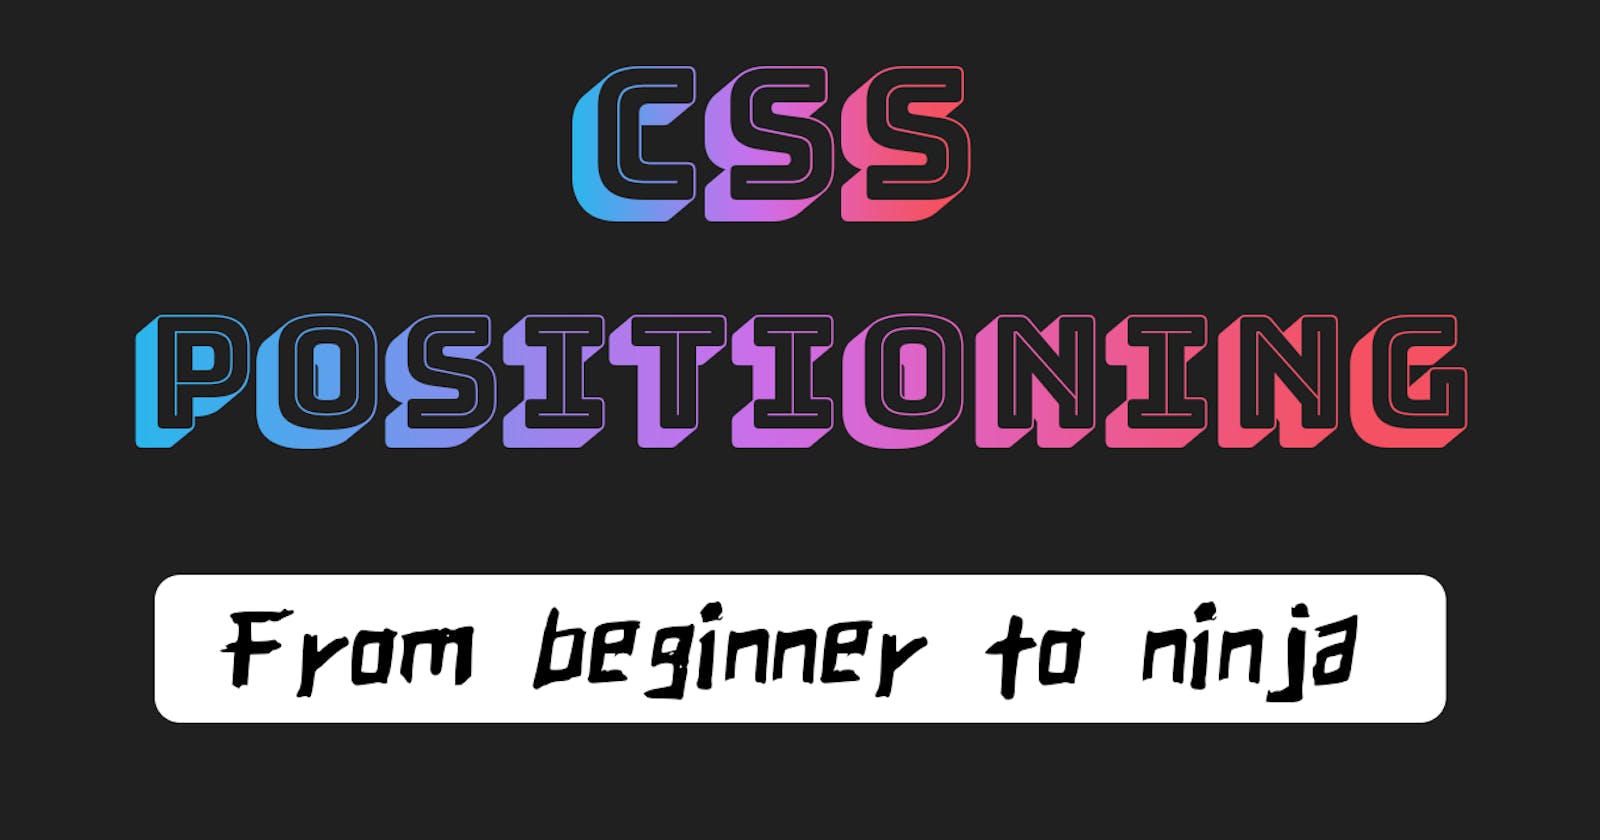 Master CSS positioning in 5 minutes